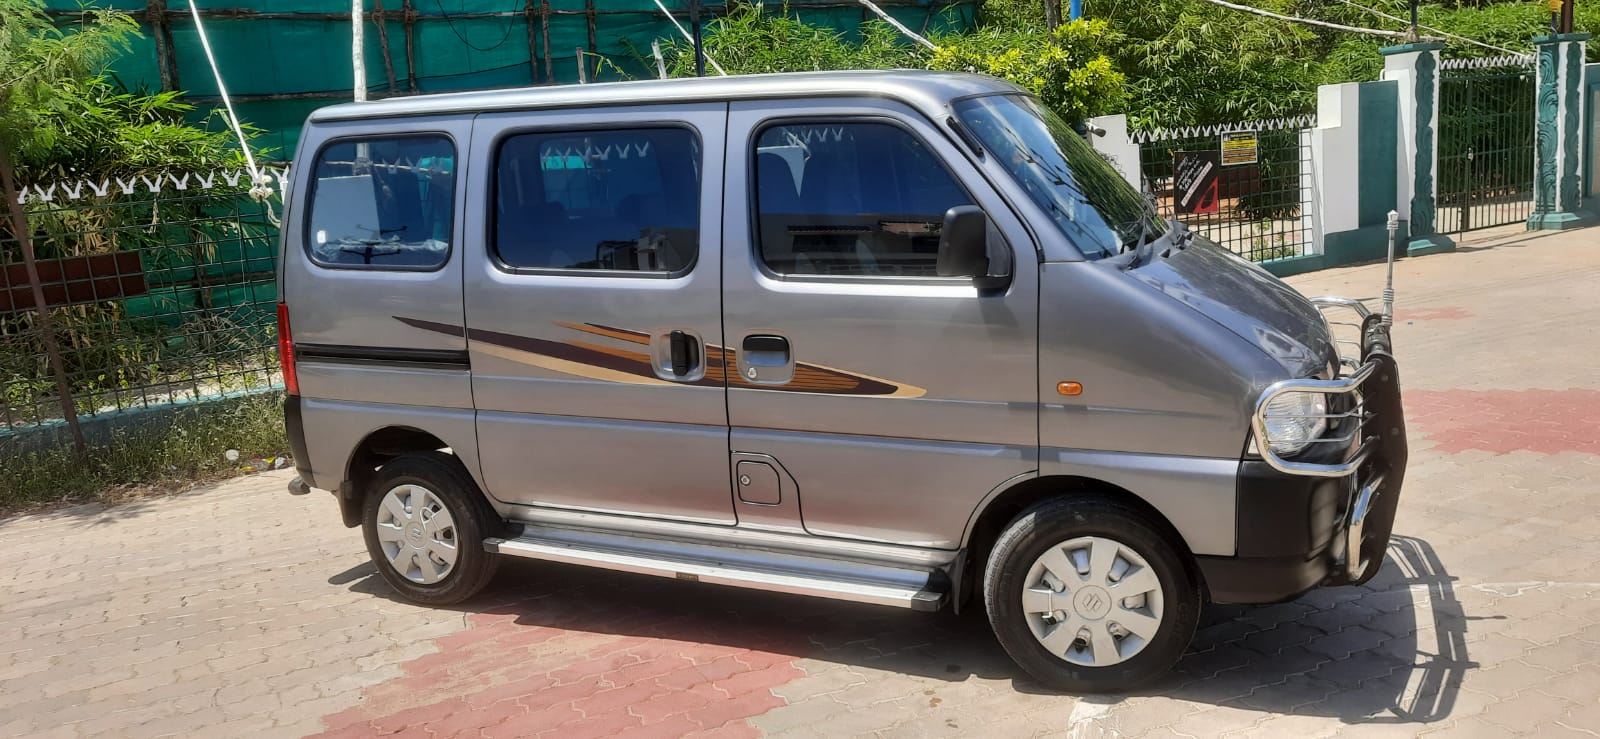 4341-for-sale-Maruthi-Suzuki-Eeco-Petrol-First-Owner-2019-TN-registered-rs-0